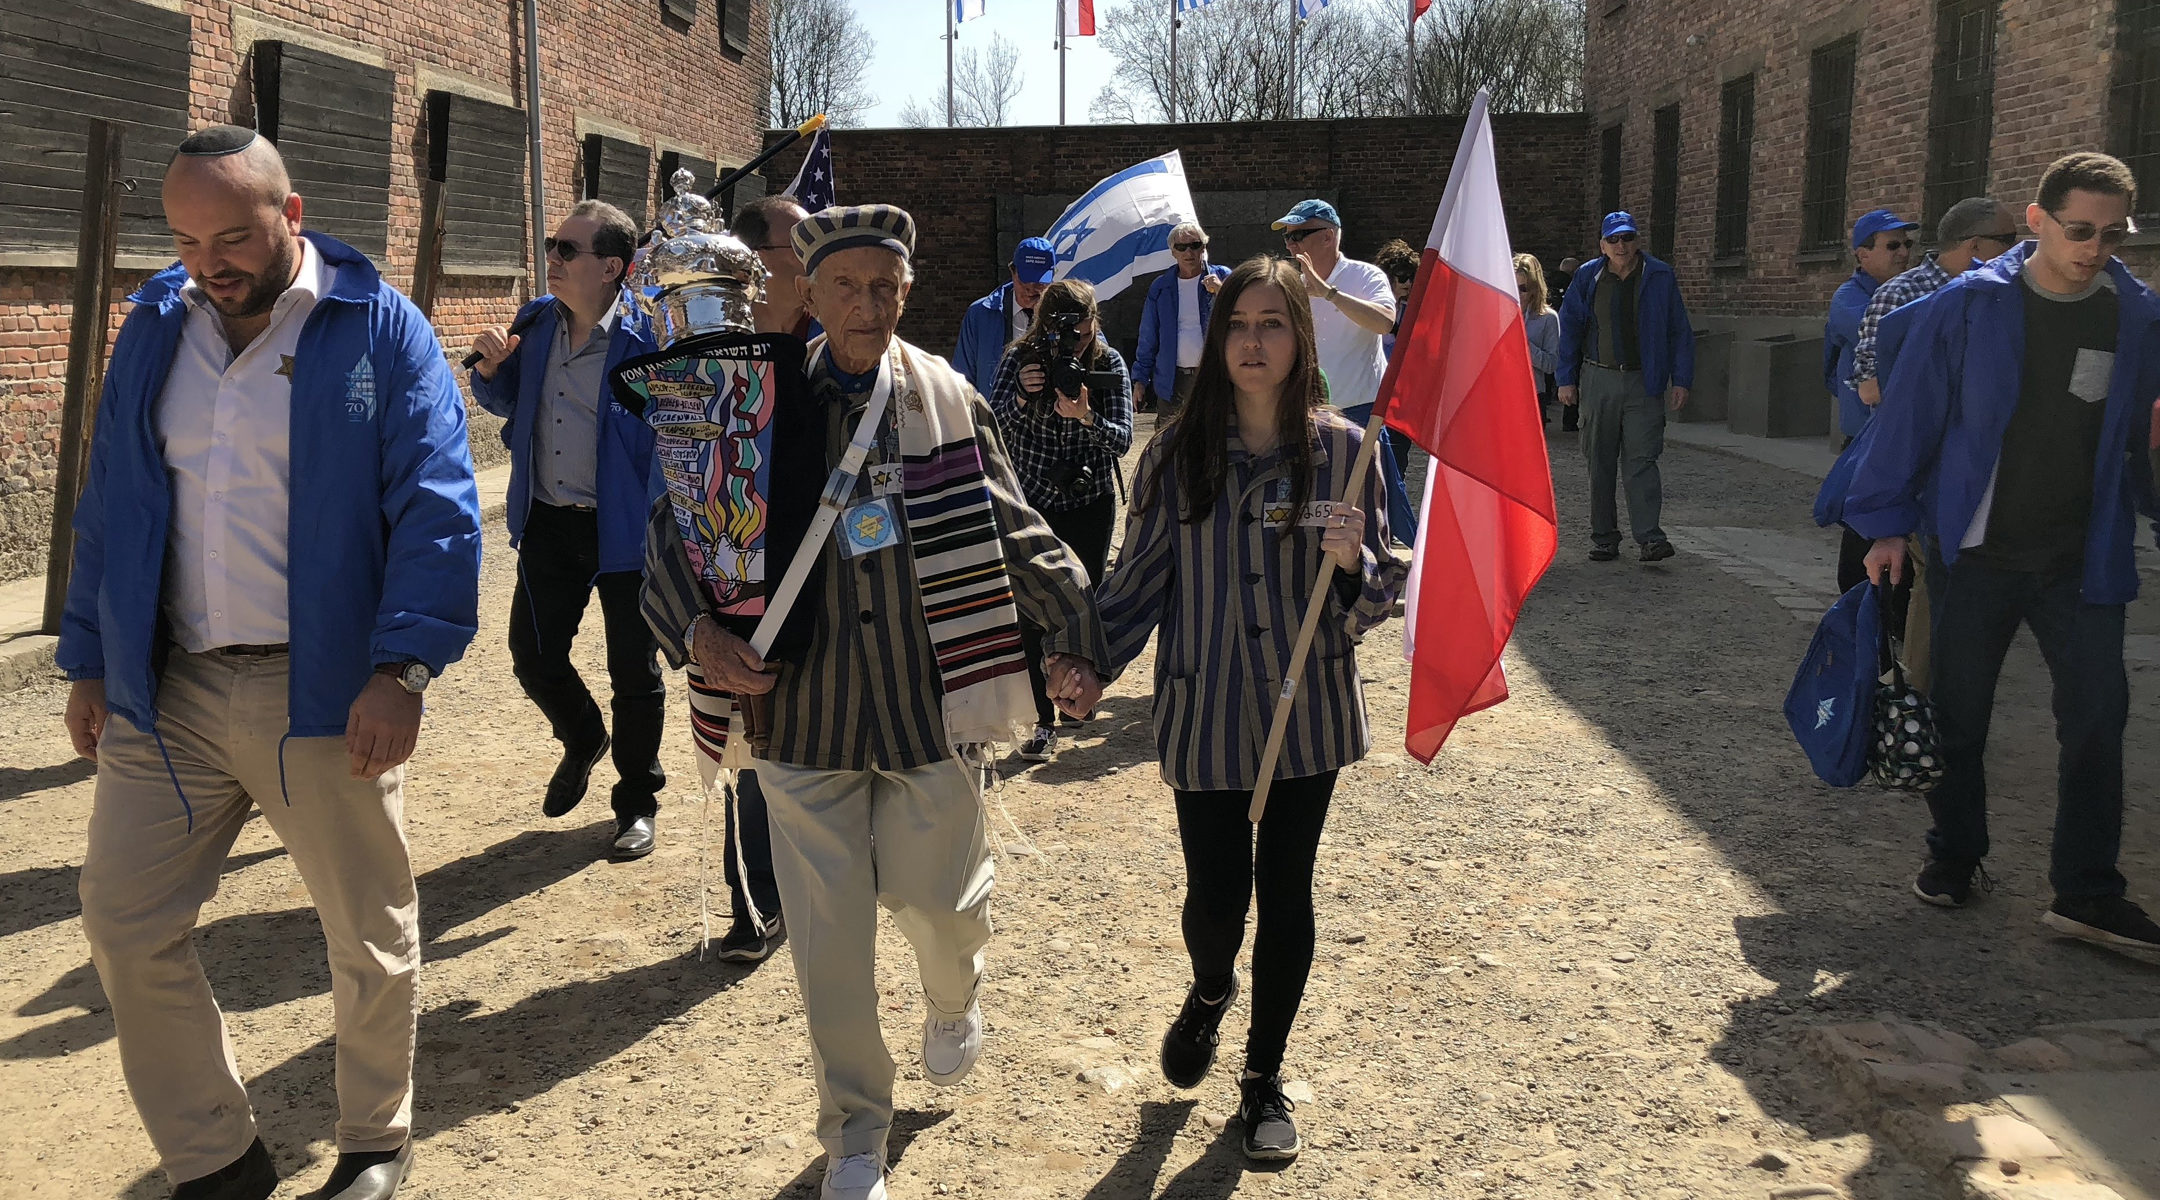 Edward Mosberg, holding a Torah scroll, during March of the Living in 2017 at the former death camp Auschwitz in Poland. (Courtesy of From the Depths)